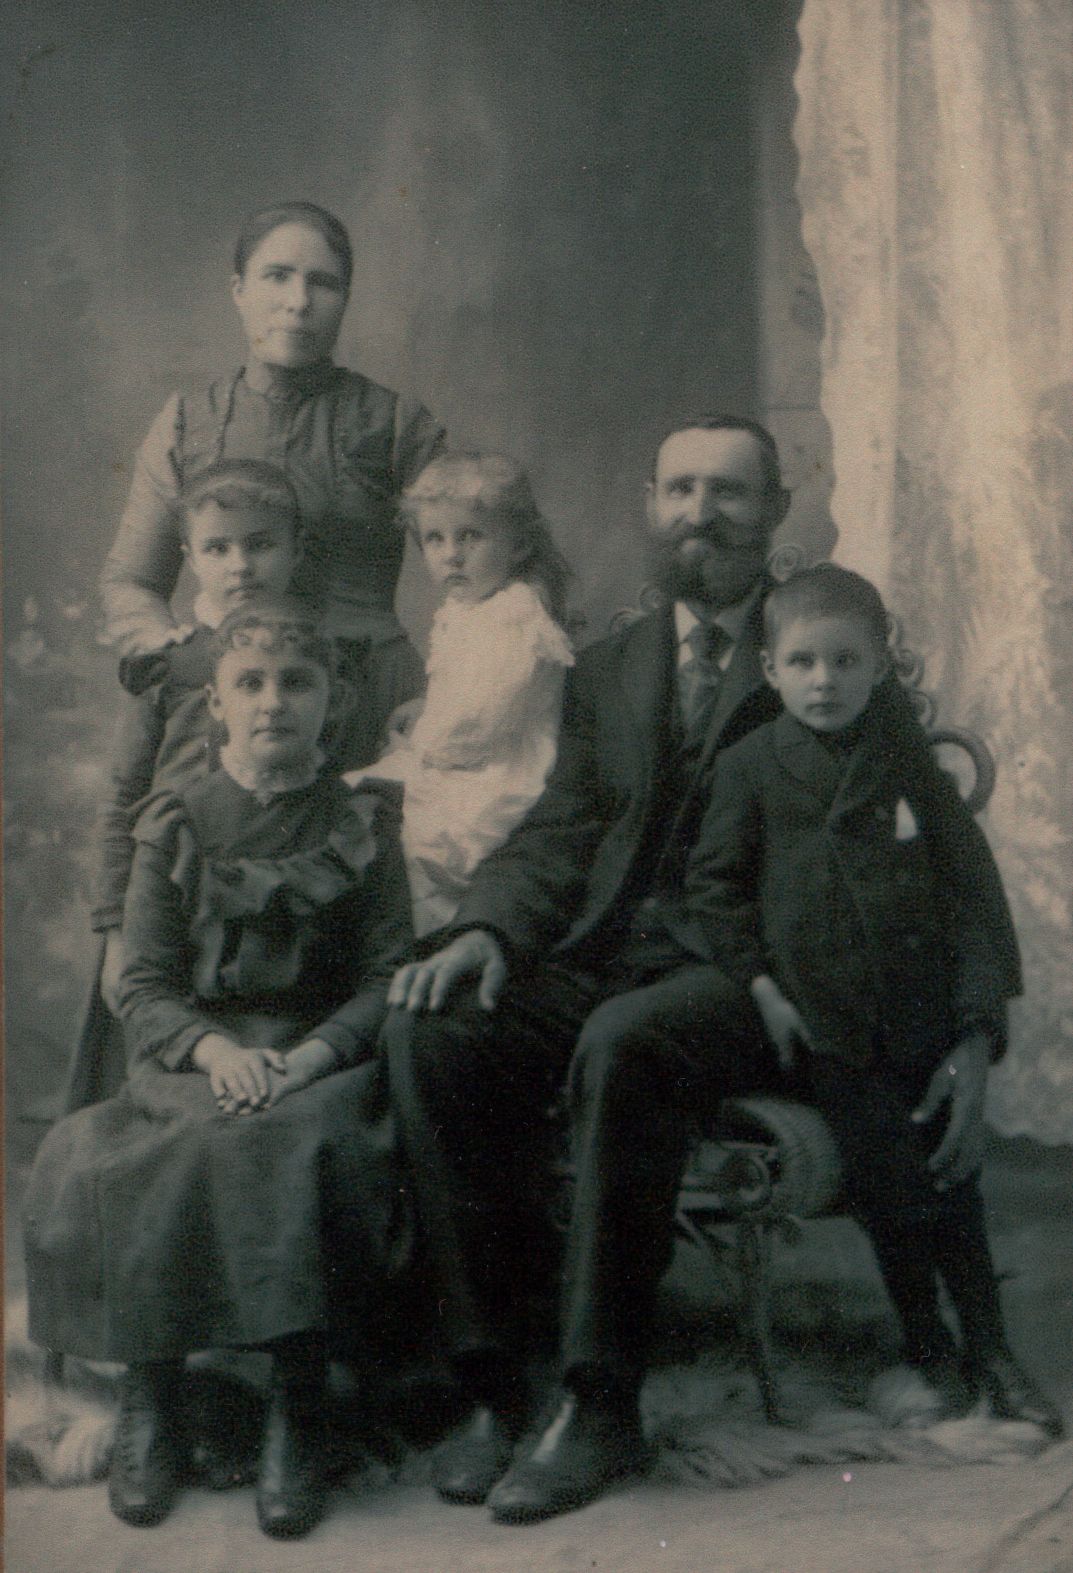 Learn How To Date An Old Photograph To Find Ancestors And Build Your Family Tree!